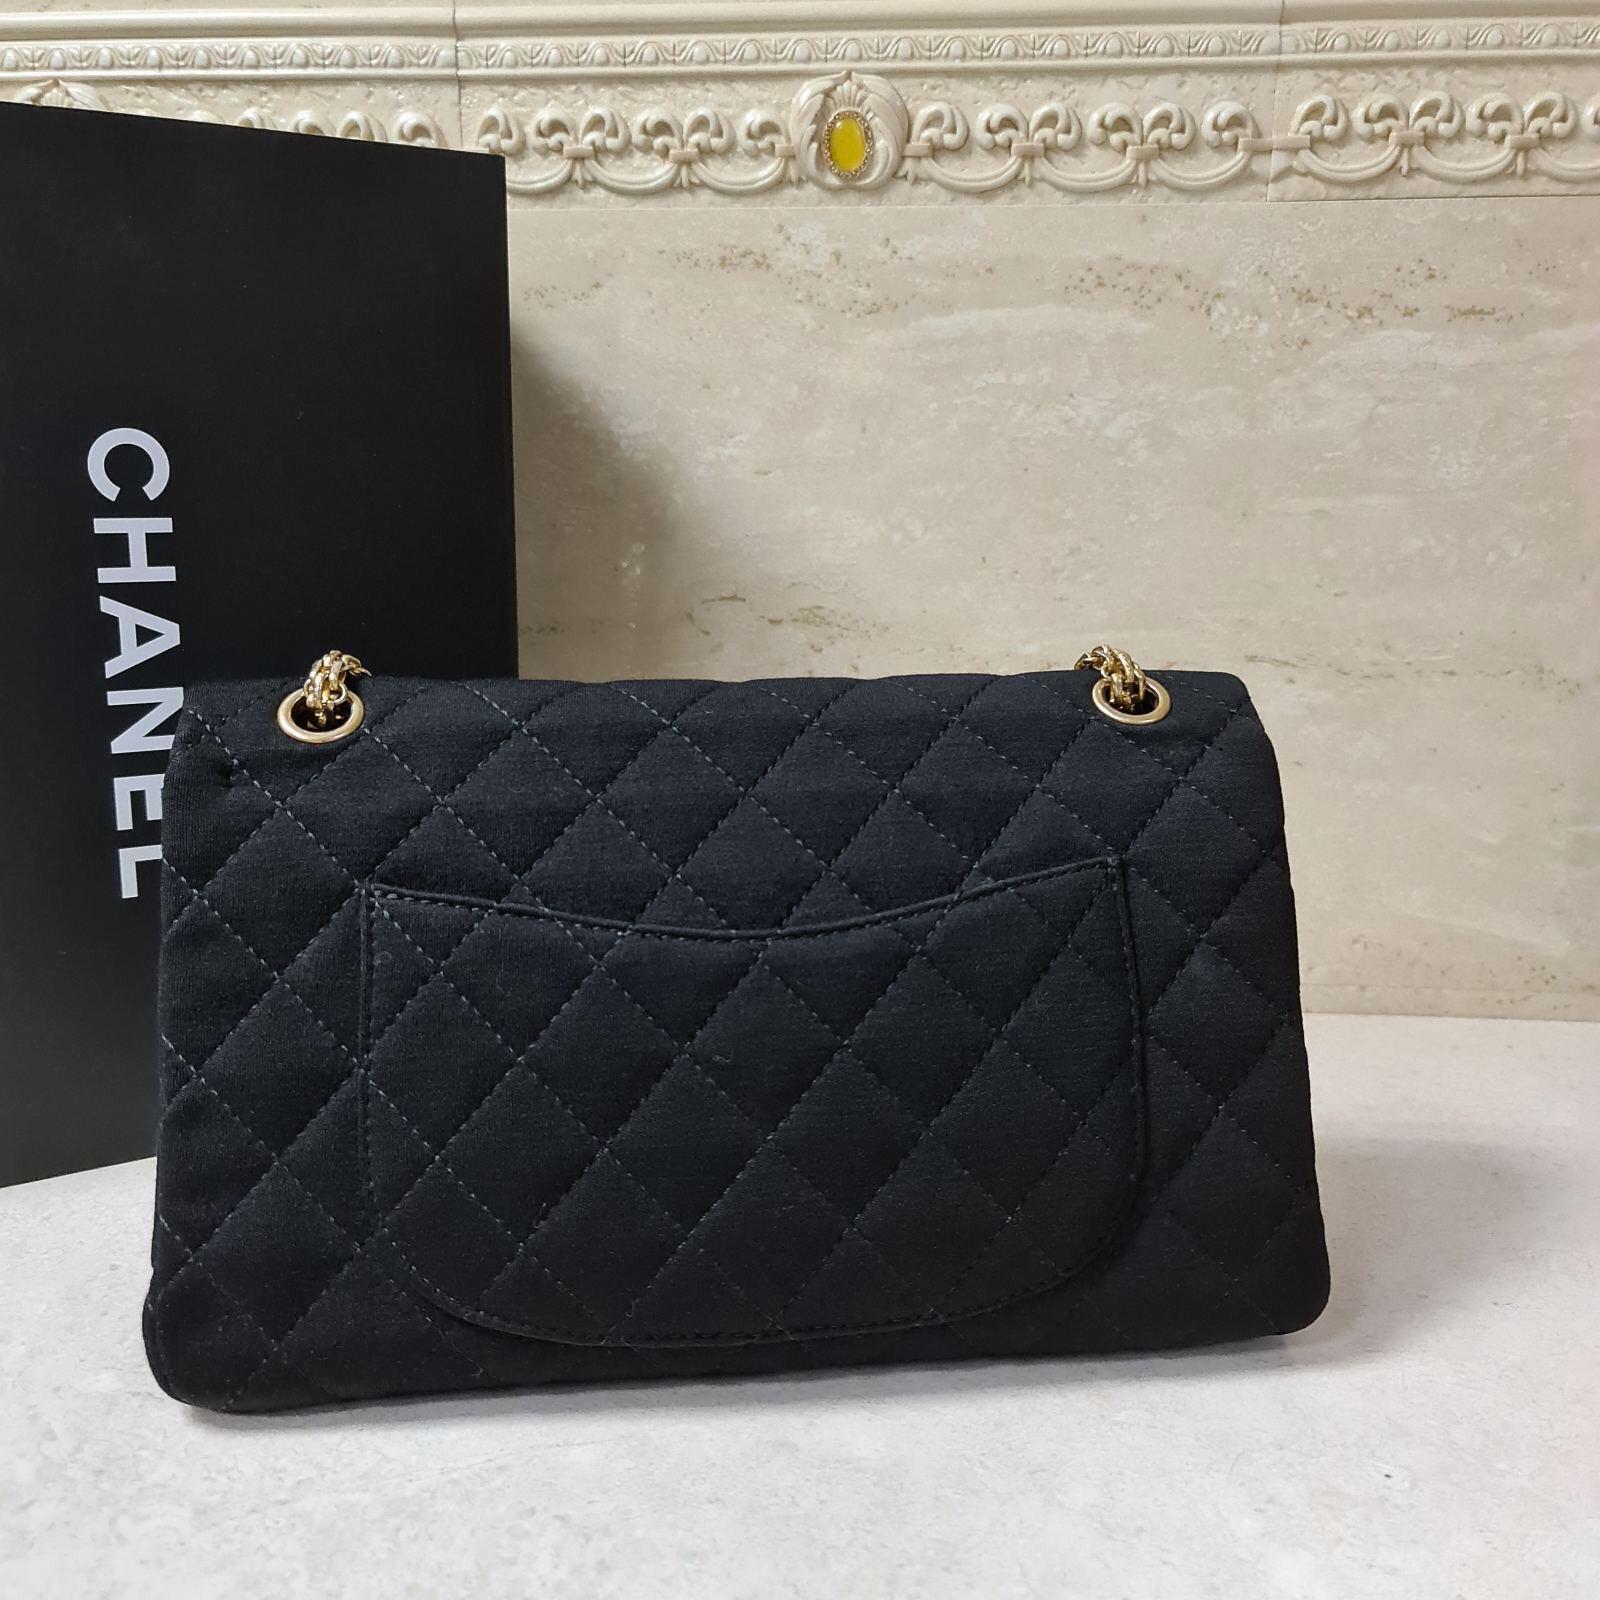 Exquisitely crafted from black fabric, this Reissue 2.55 flap bag from Chanel has the signature mademoiselle lock on the flap closure. It has a quilted pattern all over and the piece is complete gold tone hardware, a leather lined interior and a